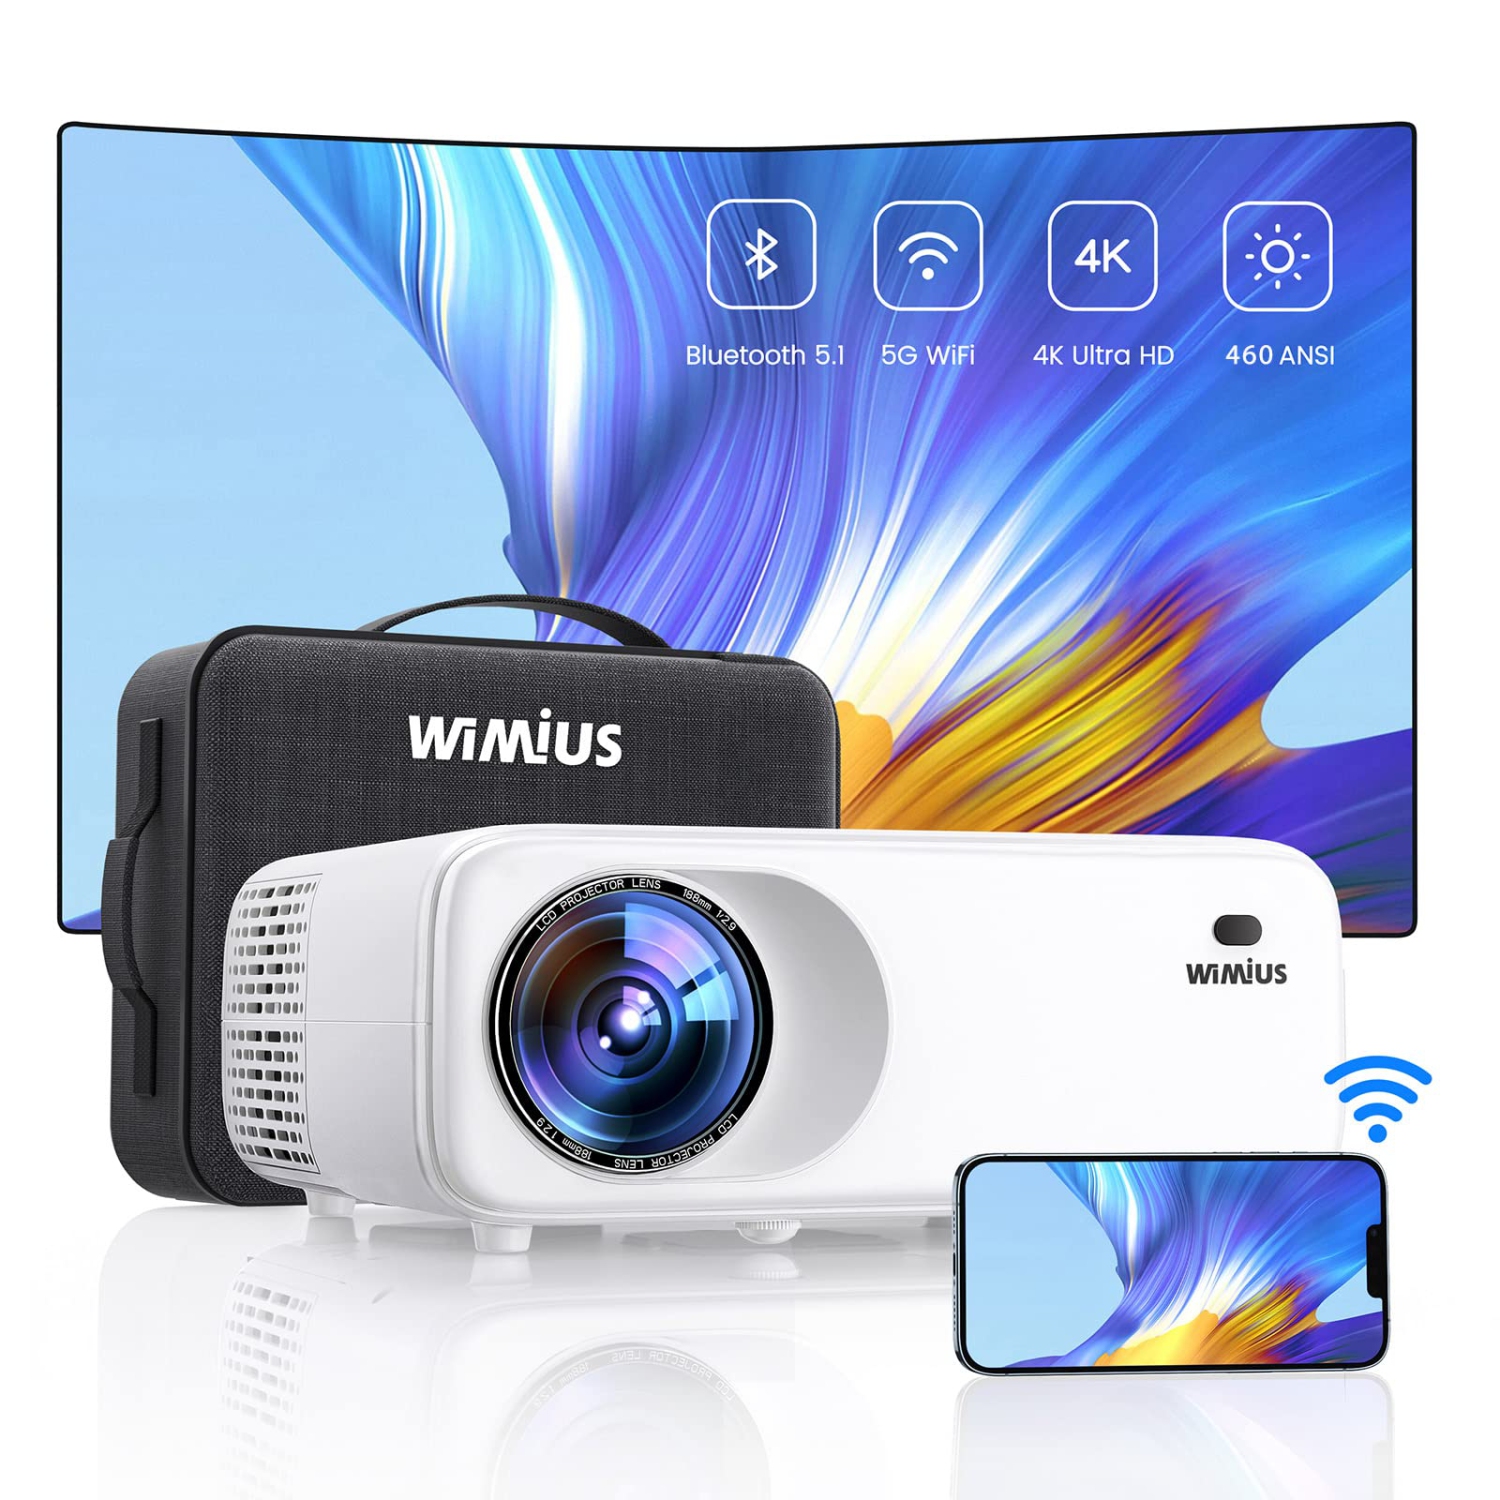 WIMIUS W6 Native 1080P 5G WiFi Bluetooth 4K Projector, 400 ANSI Outdoor Projector with 300" Display , 4P/4D Keystone, 50% Zoom, Video Projector Compatible iOS/Android/TV Stick